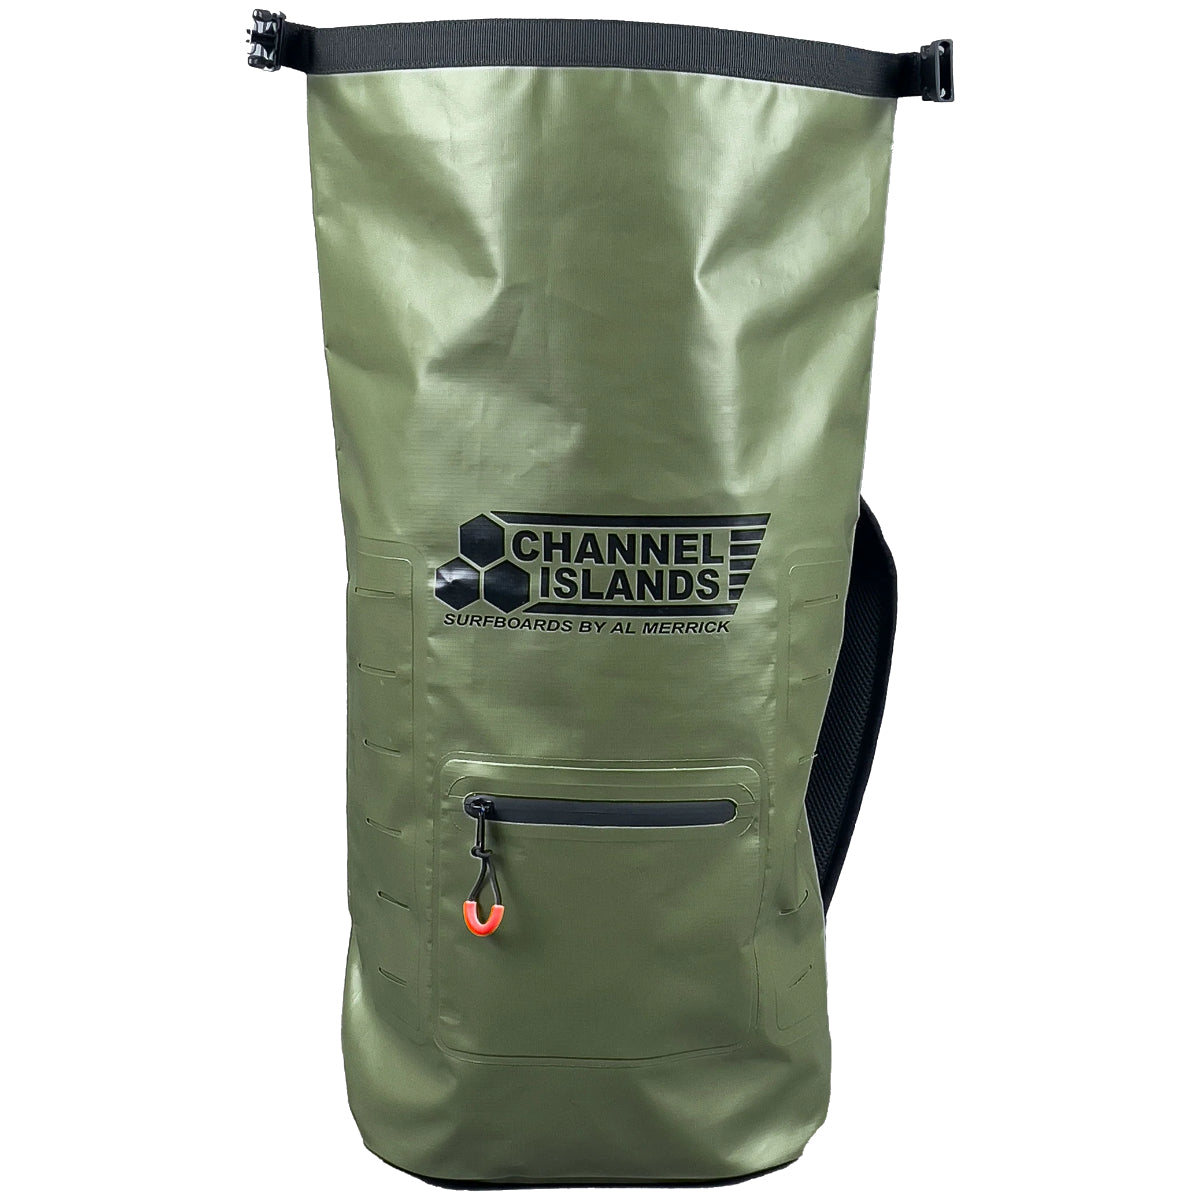 Waterproof Kite Storage Bag Keeps Your Kite Dry and in Excellent Condition